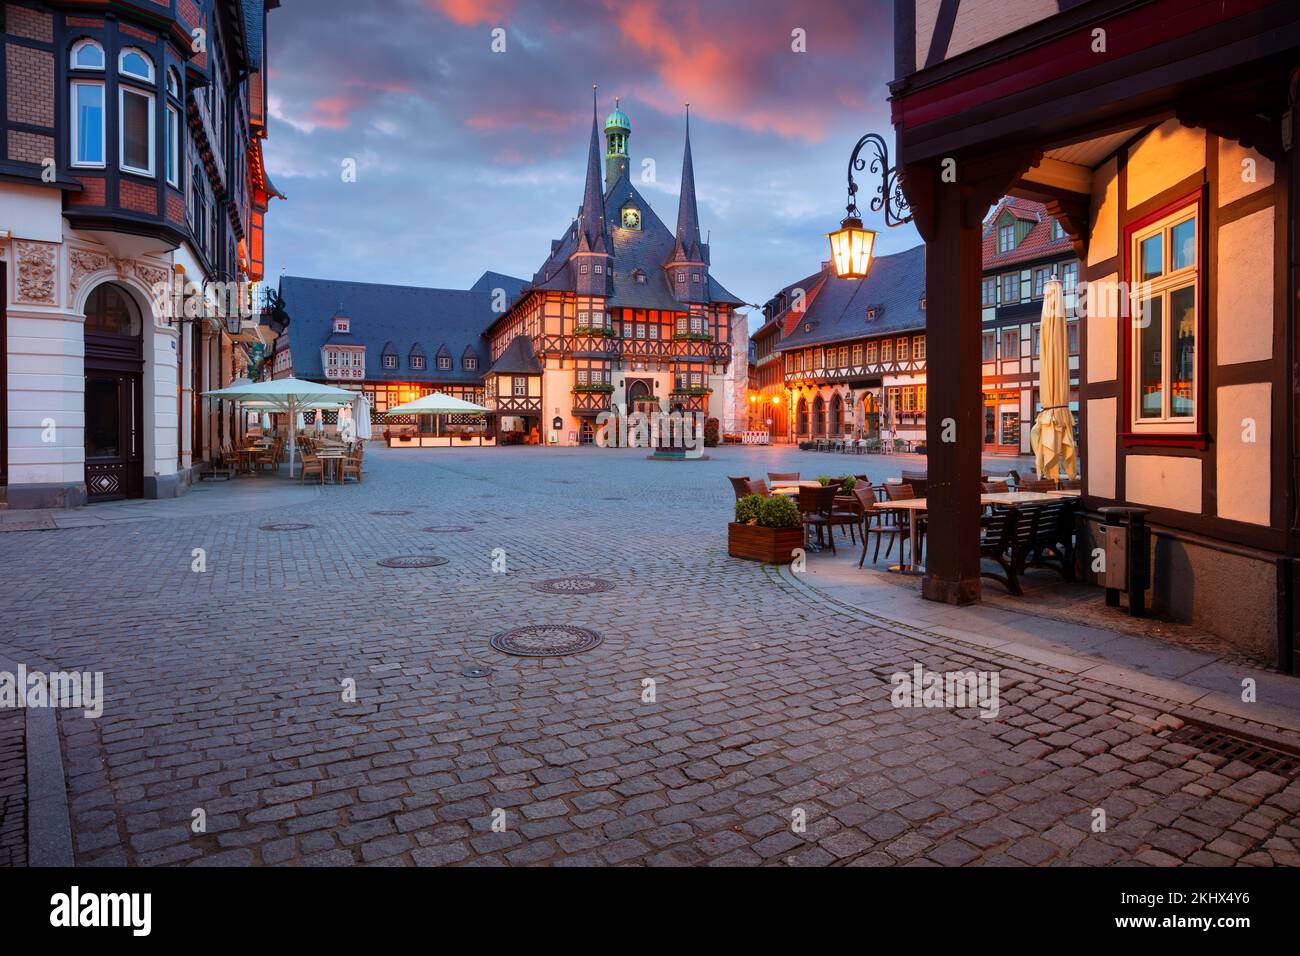 Wernigerode, Germany. Cityscape image of historical downtown of Wernigerode, Germany with Old Town Hall at summer sunrise. Stock Photo